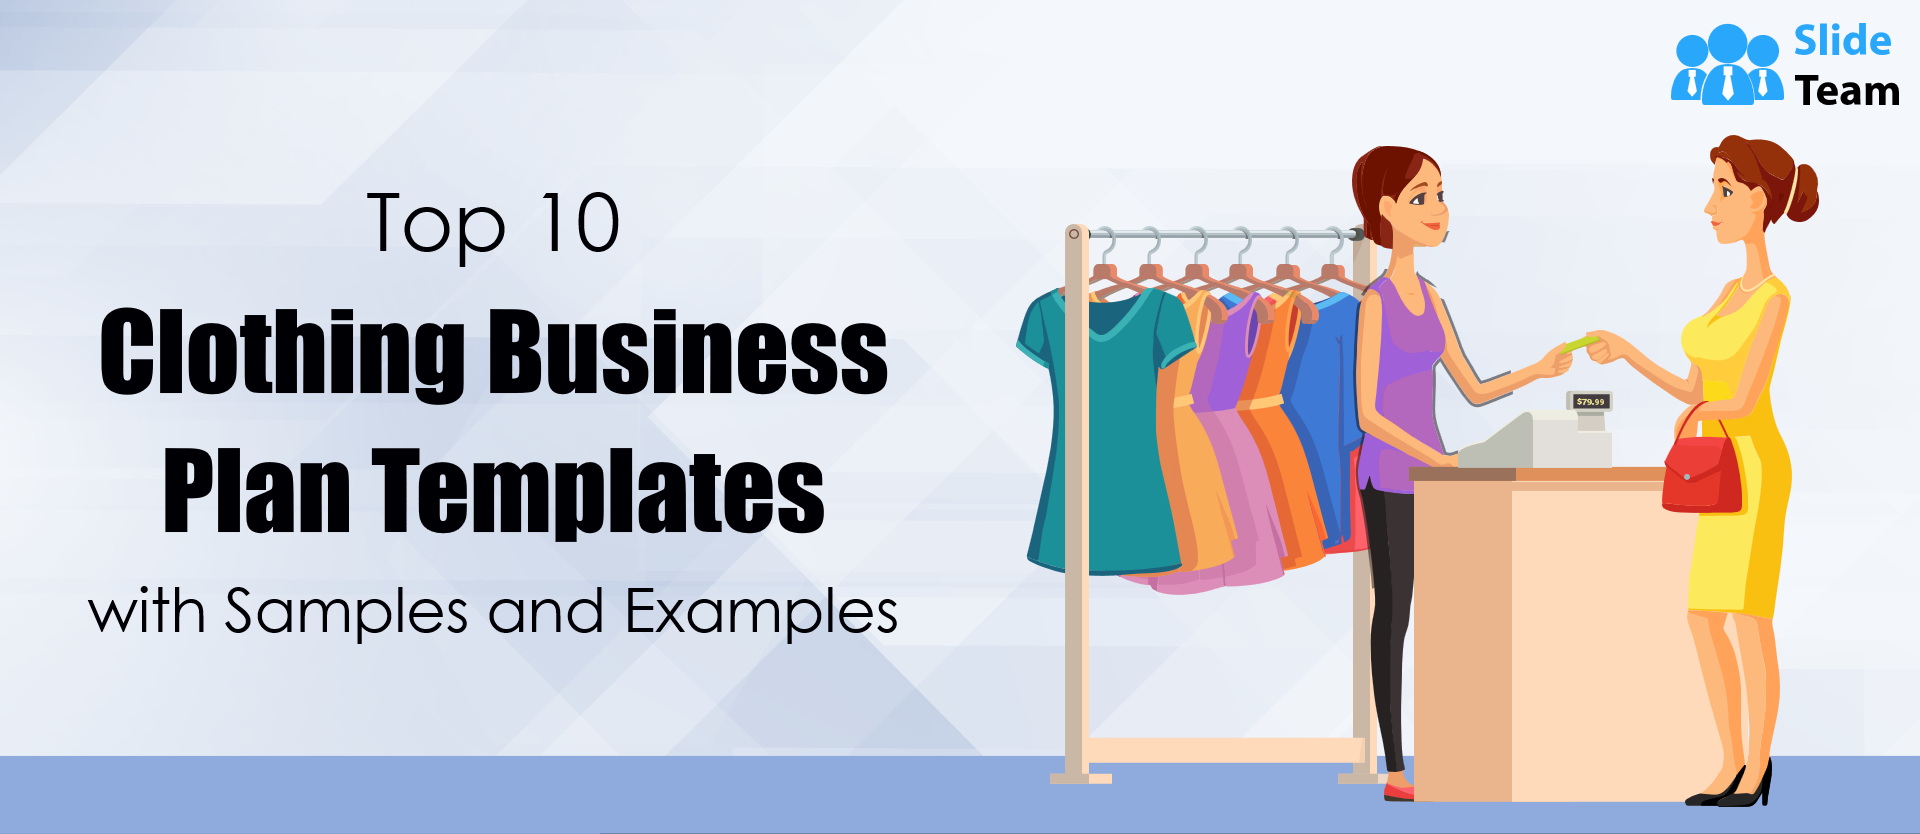 Top 10 Clothing Business Plan Templates with Samples and Examples ...